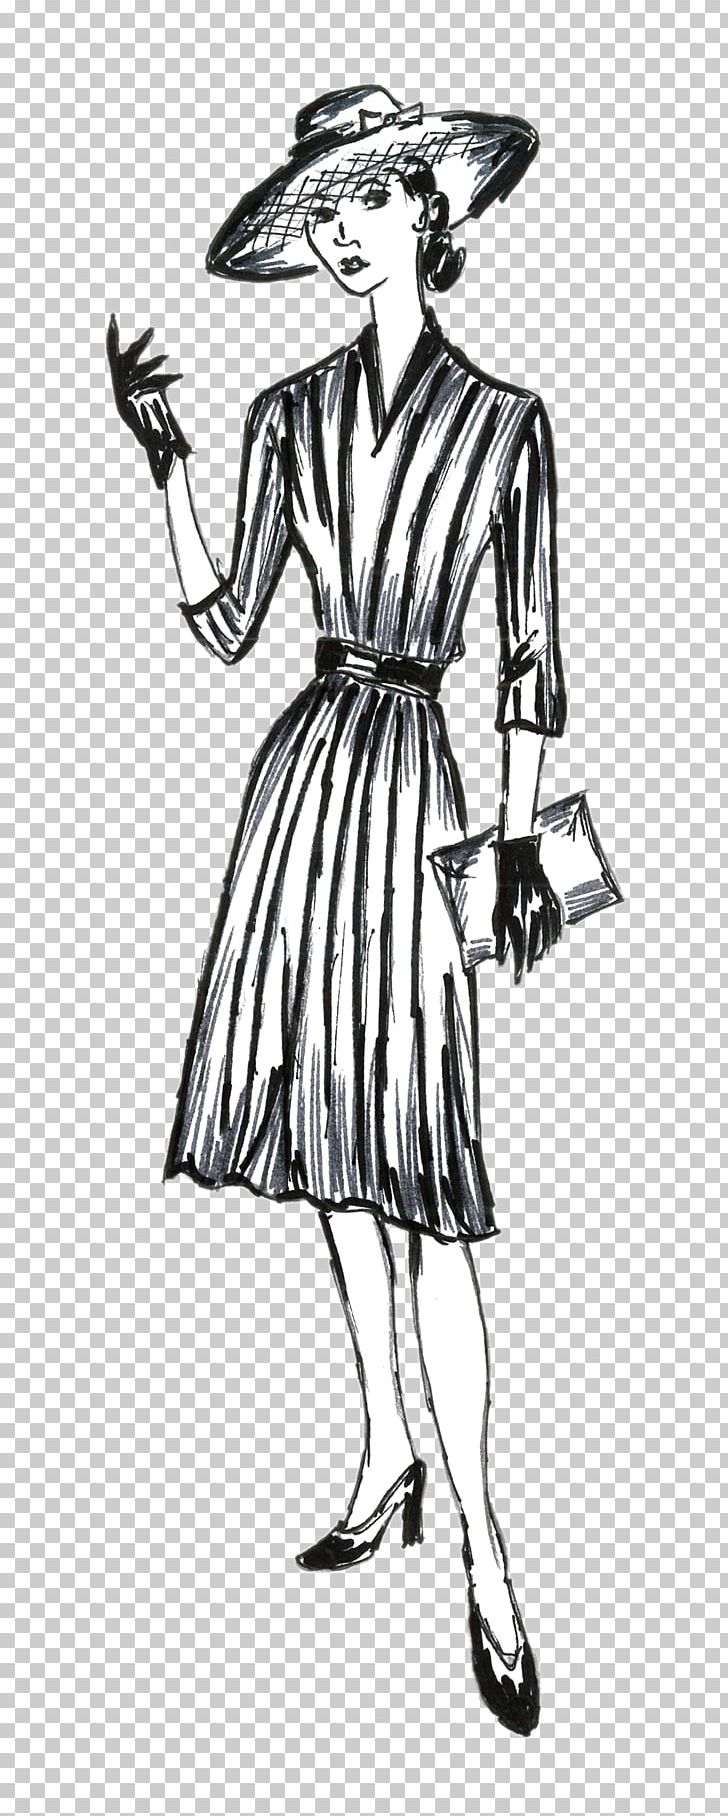 Dress Fashion Shoe Costume Pattern PNG, Clipart, Arm, Art, Black And White, Clothing, Costume Design Free PNG Download